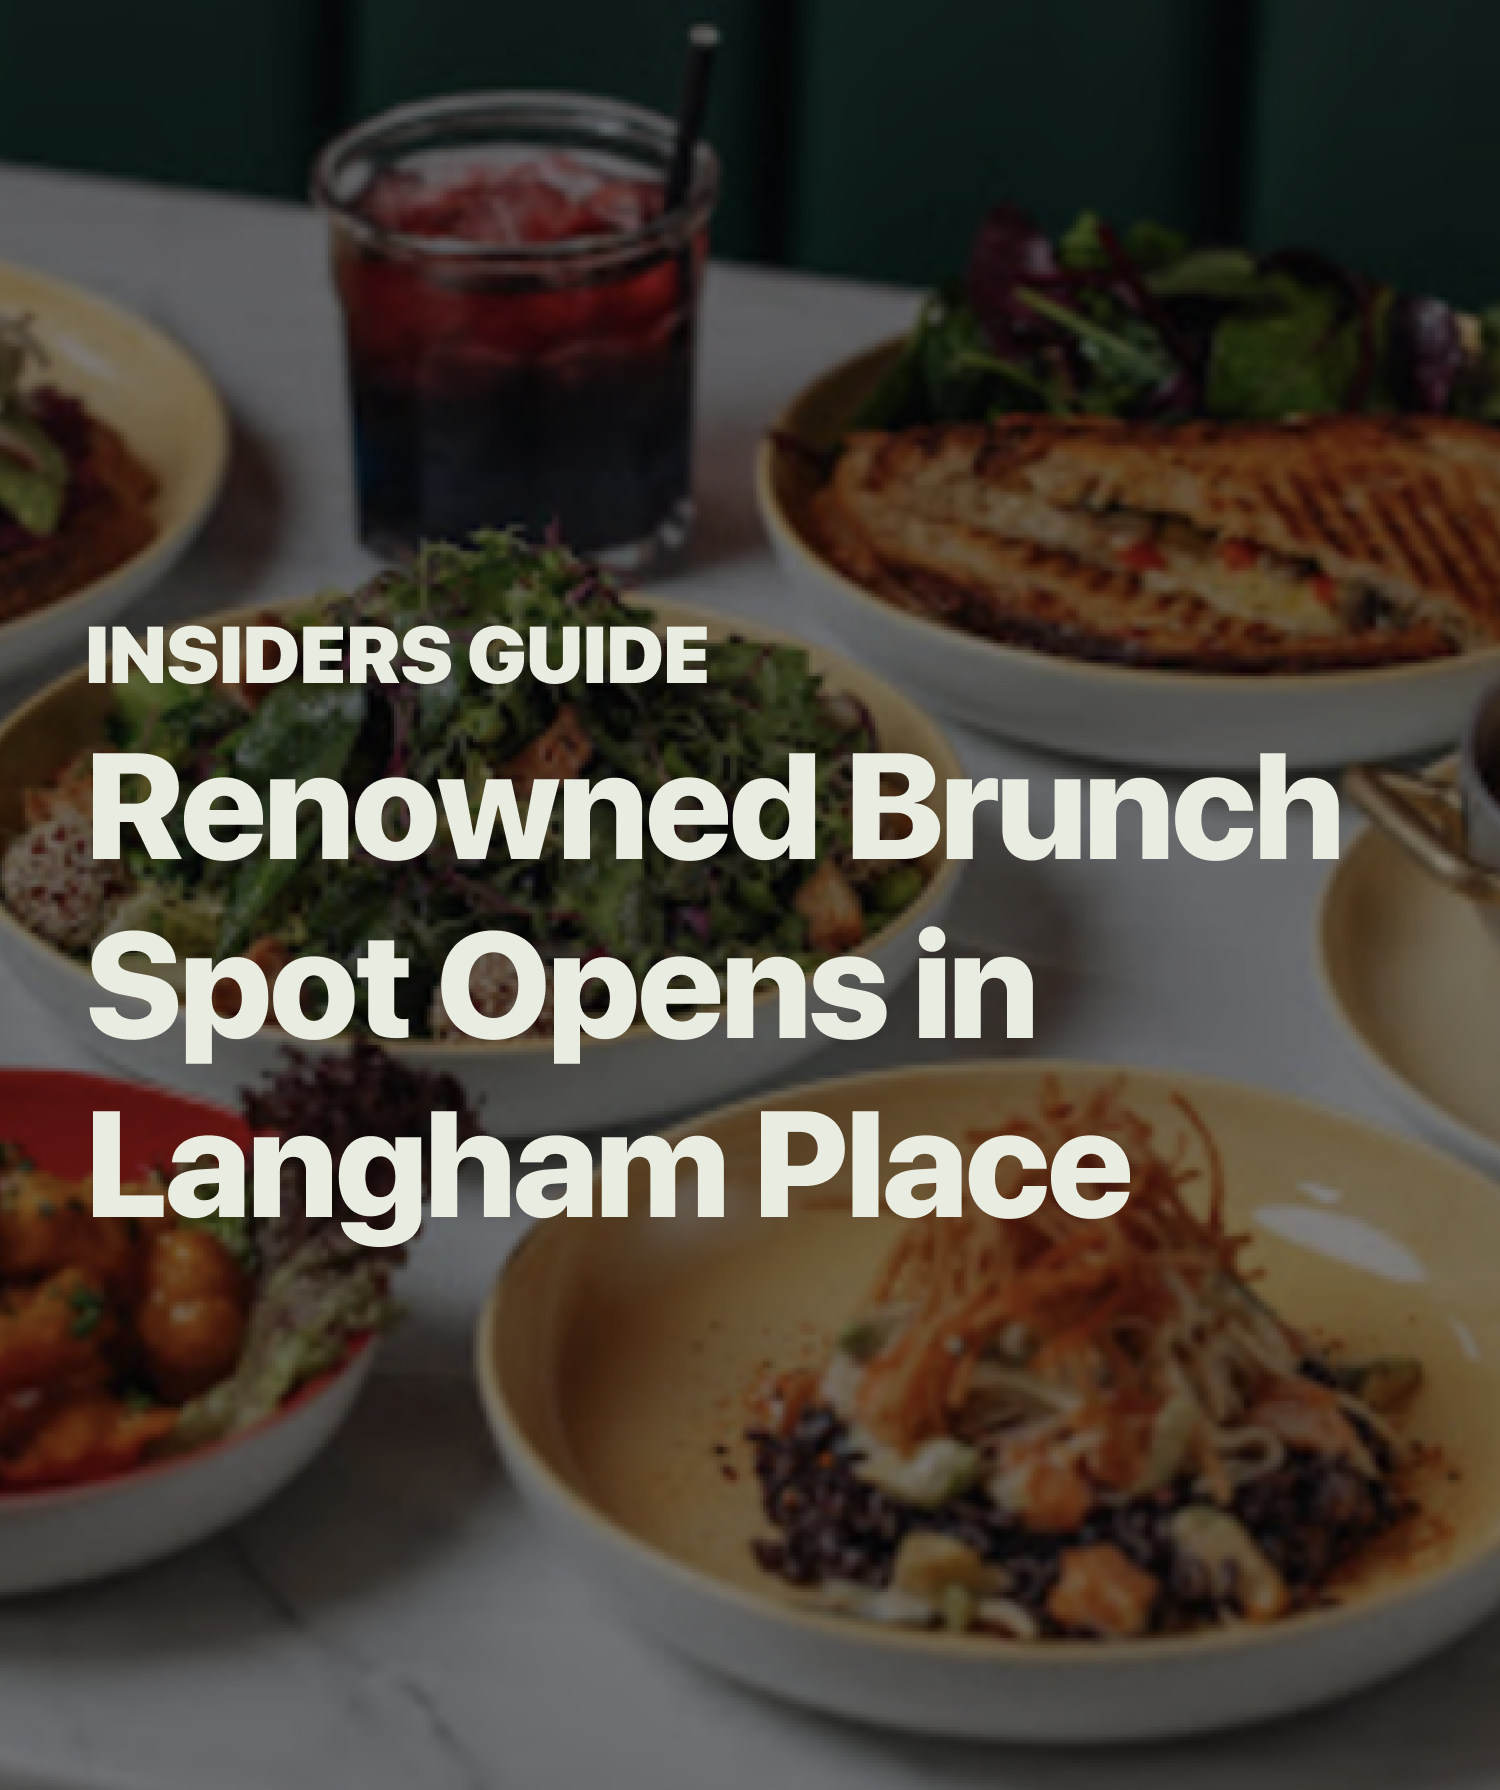 Renowned Brunch Spot Opens in Langham Place post image